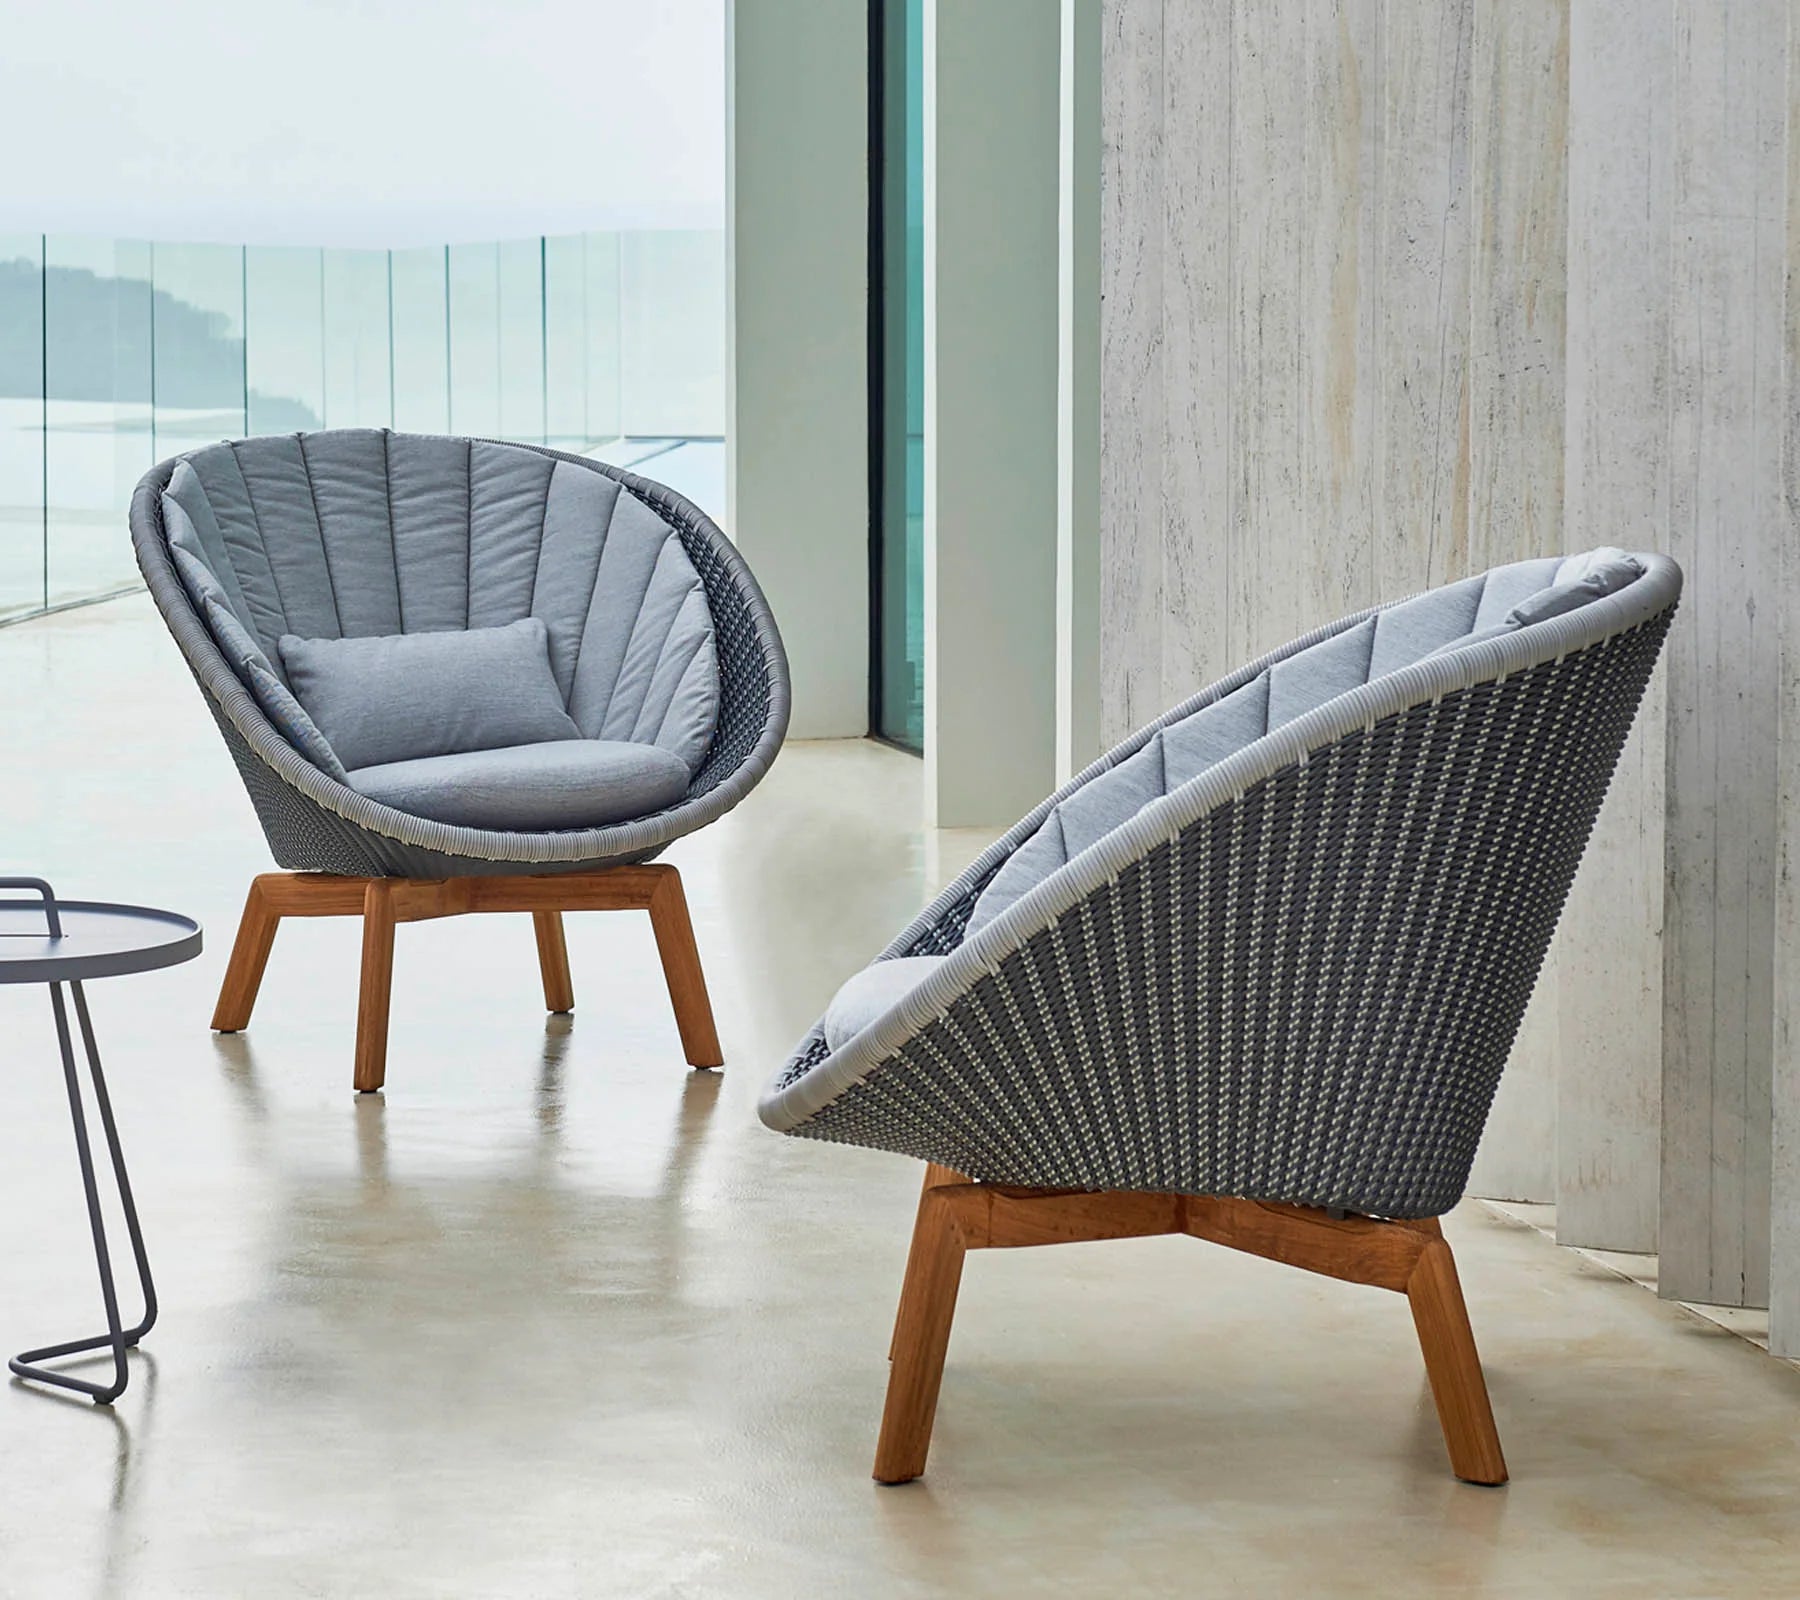 Boxhill's Peacock grey weave outdoor lounge chair with light grey outdoor round side table placed on balcony